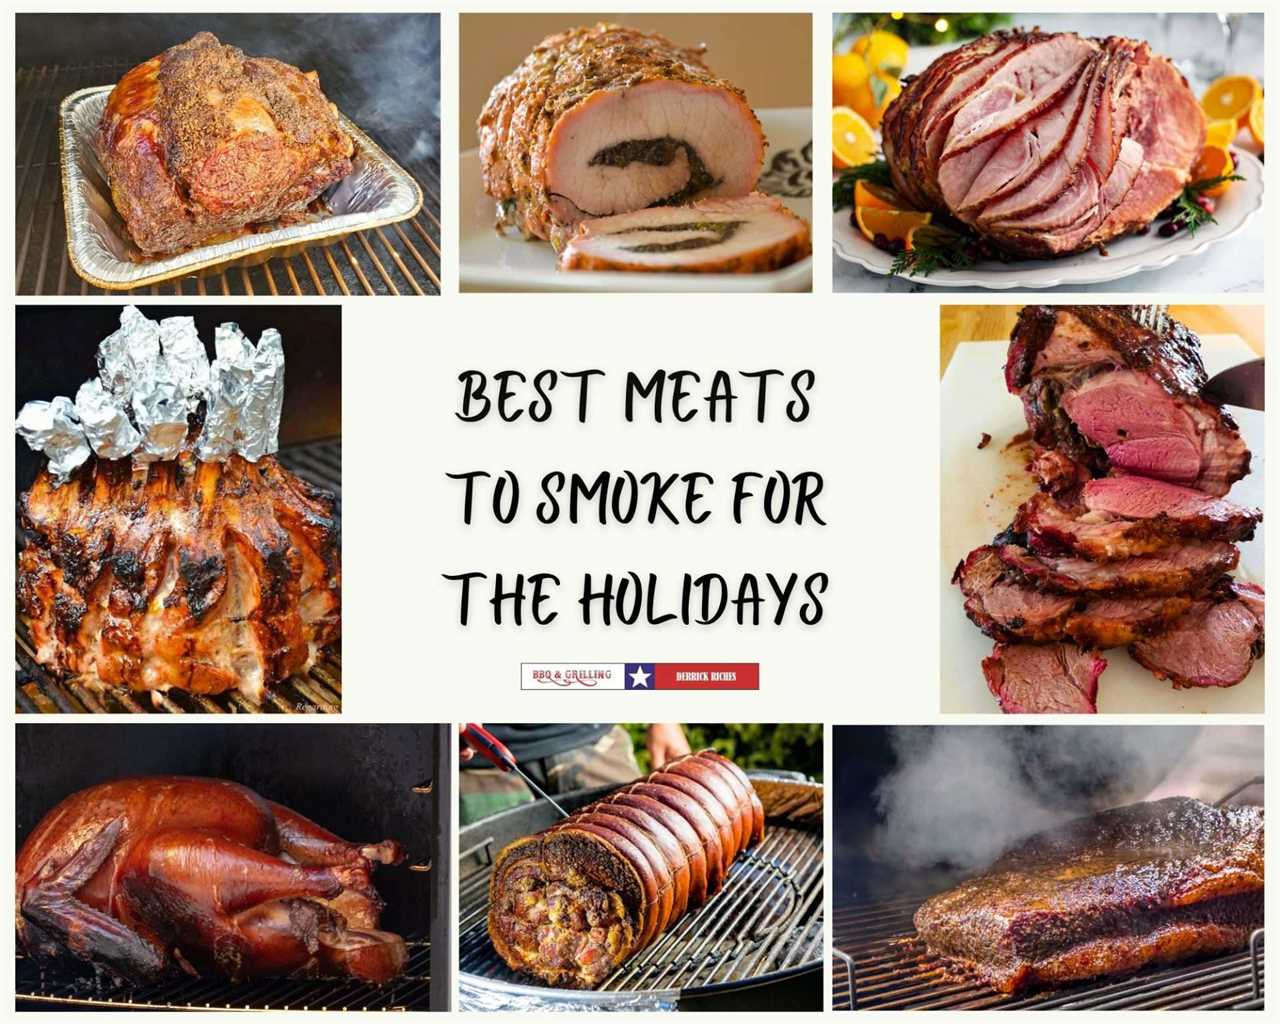 Best meats to smoke foe the holidays -blog graphic